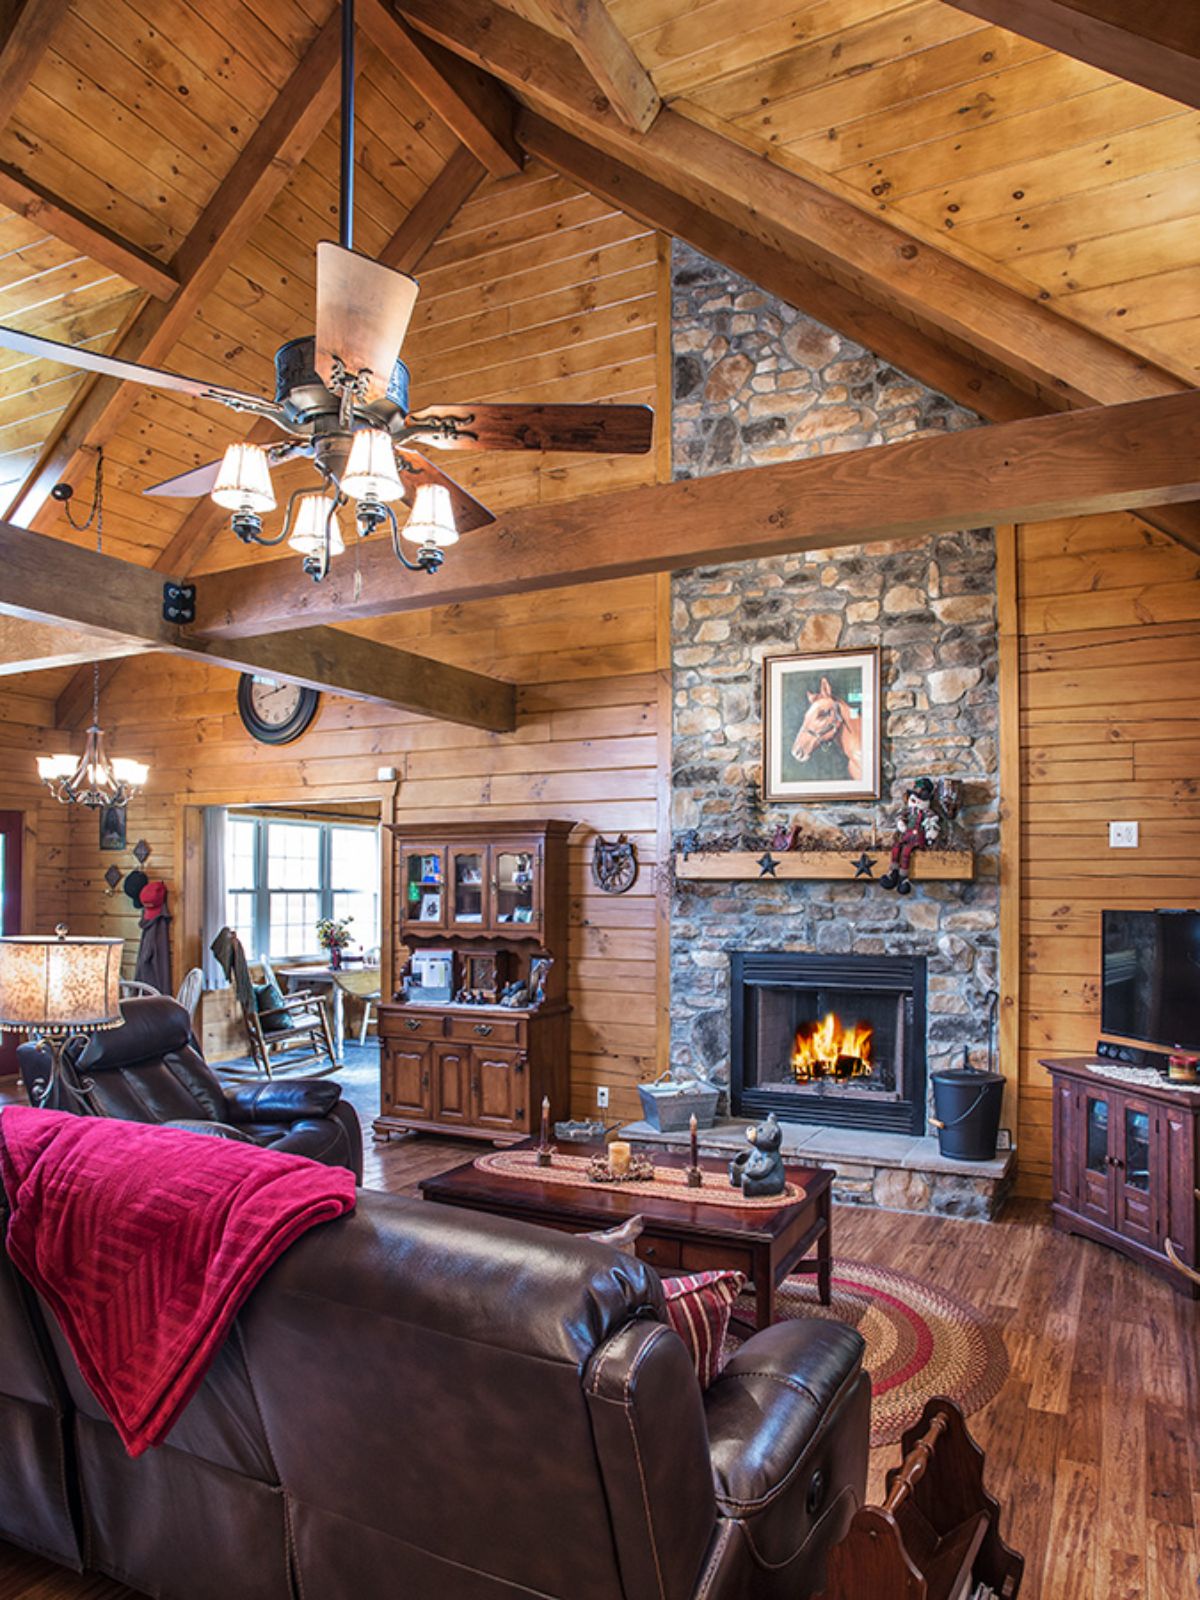 stone fireplace against log cabin wall with opening to dining room on left